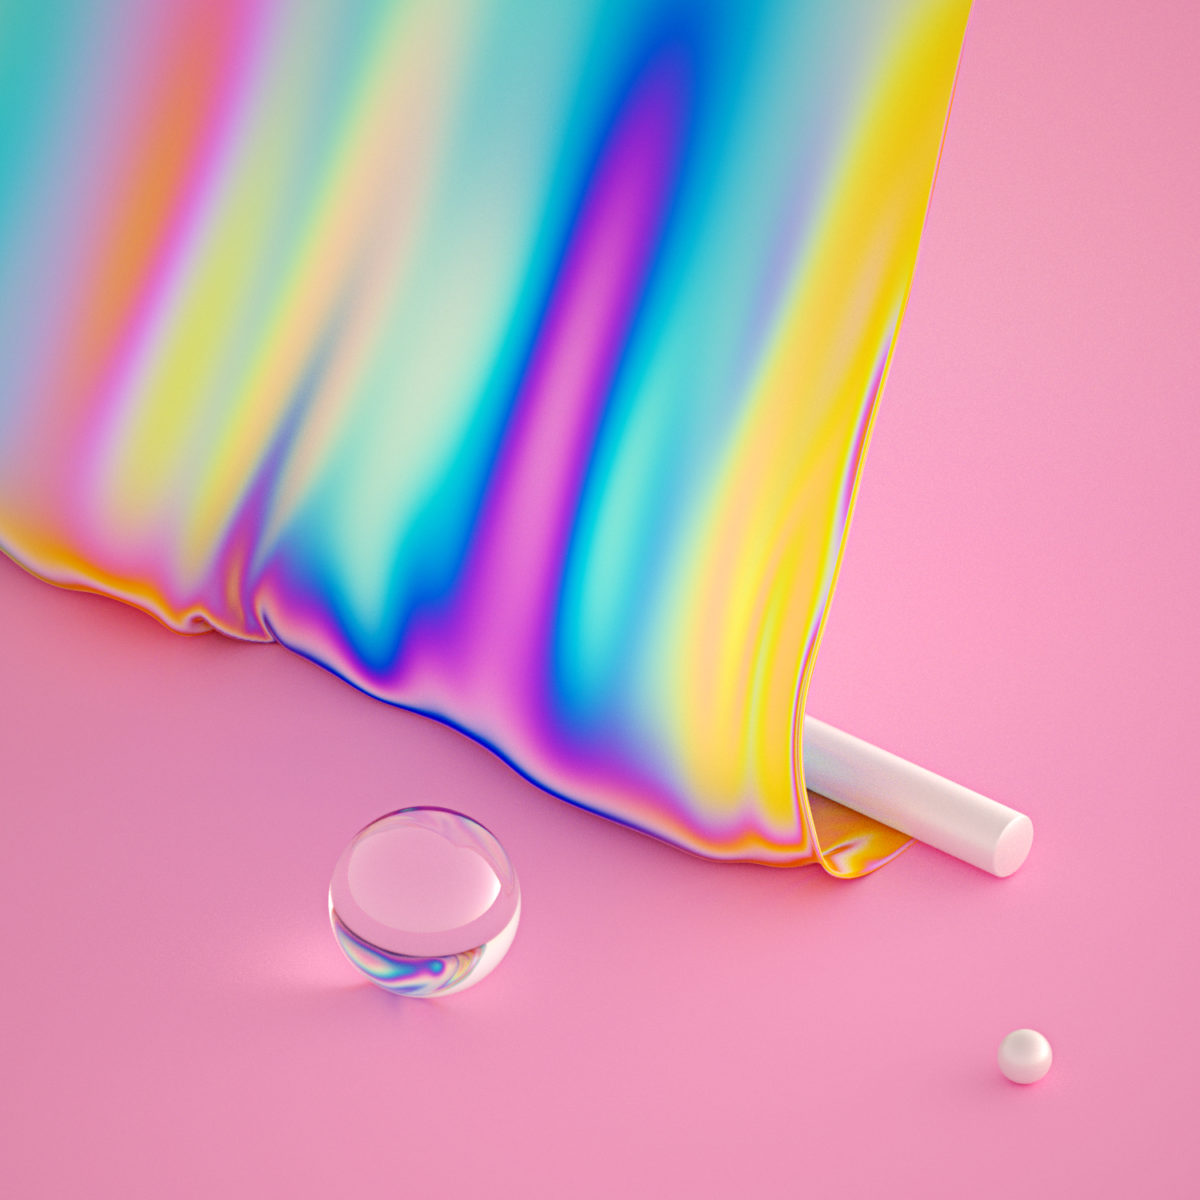 Oh My Pastel - Digital Art project by Machineast Singapore